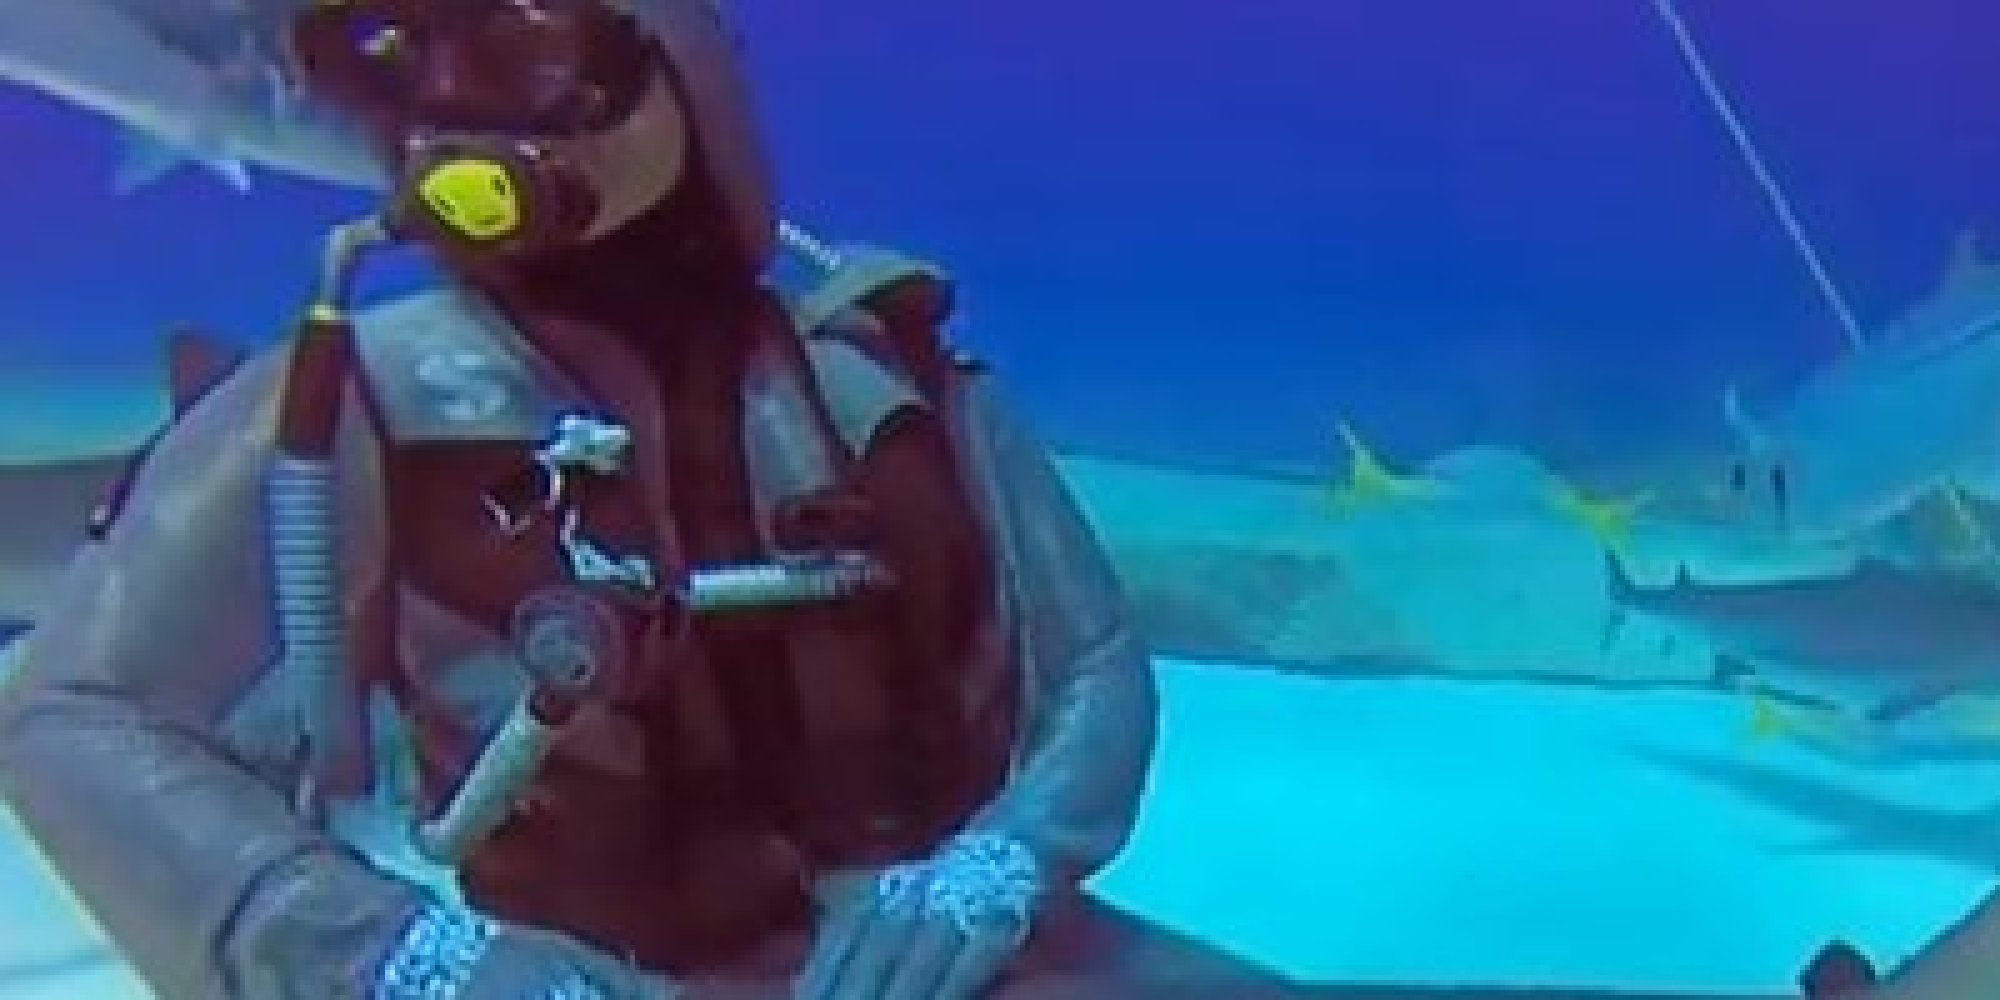 This Diver Is Not Getting Attacked By A Shark (We Promise) | HuffPost